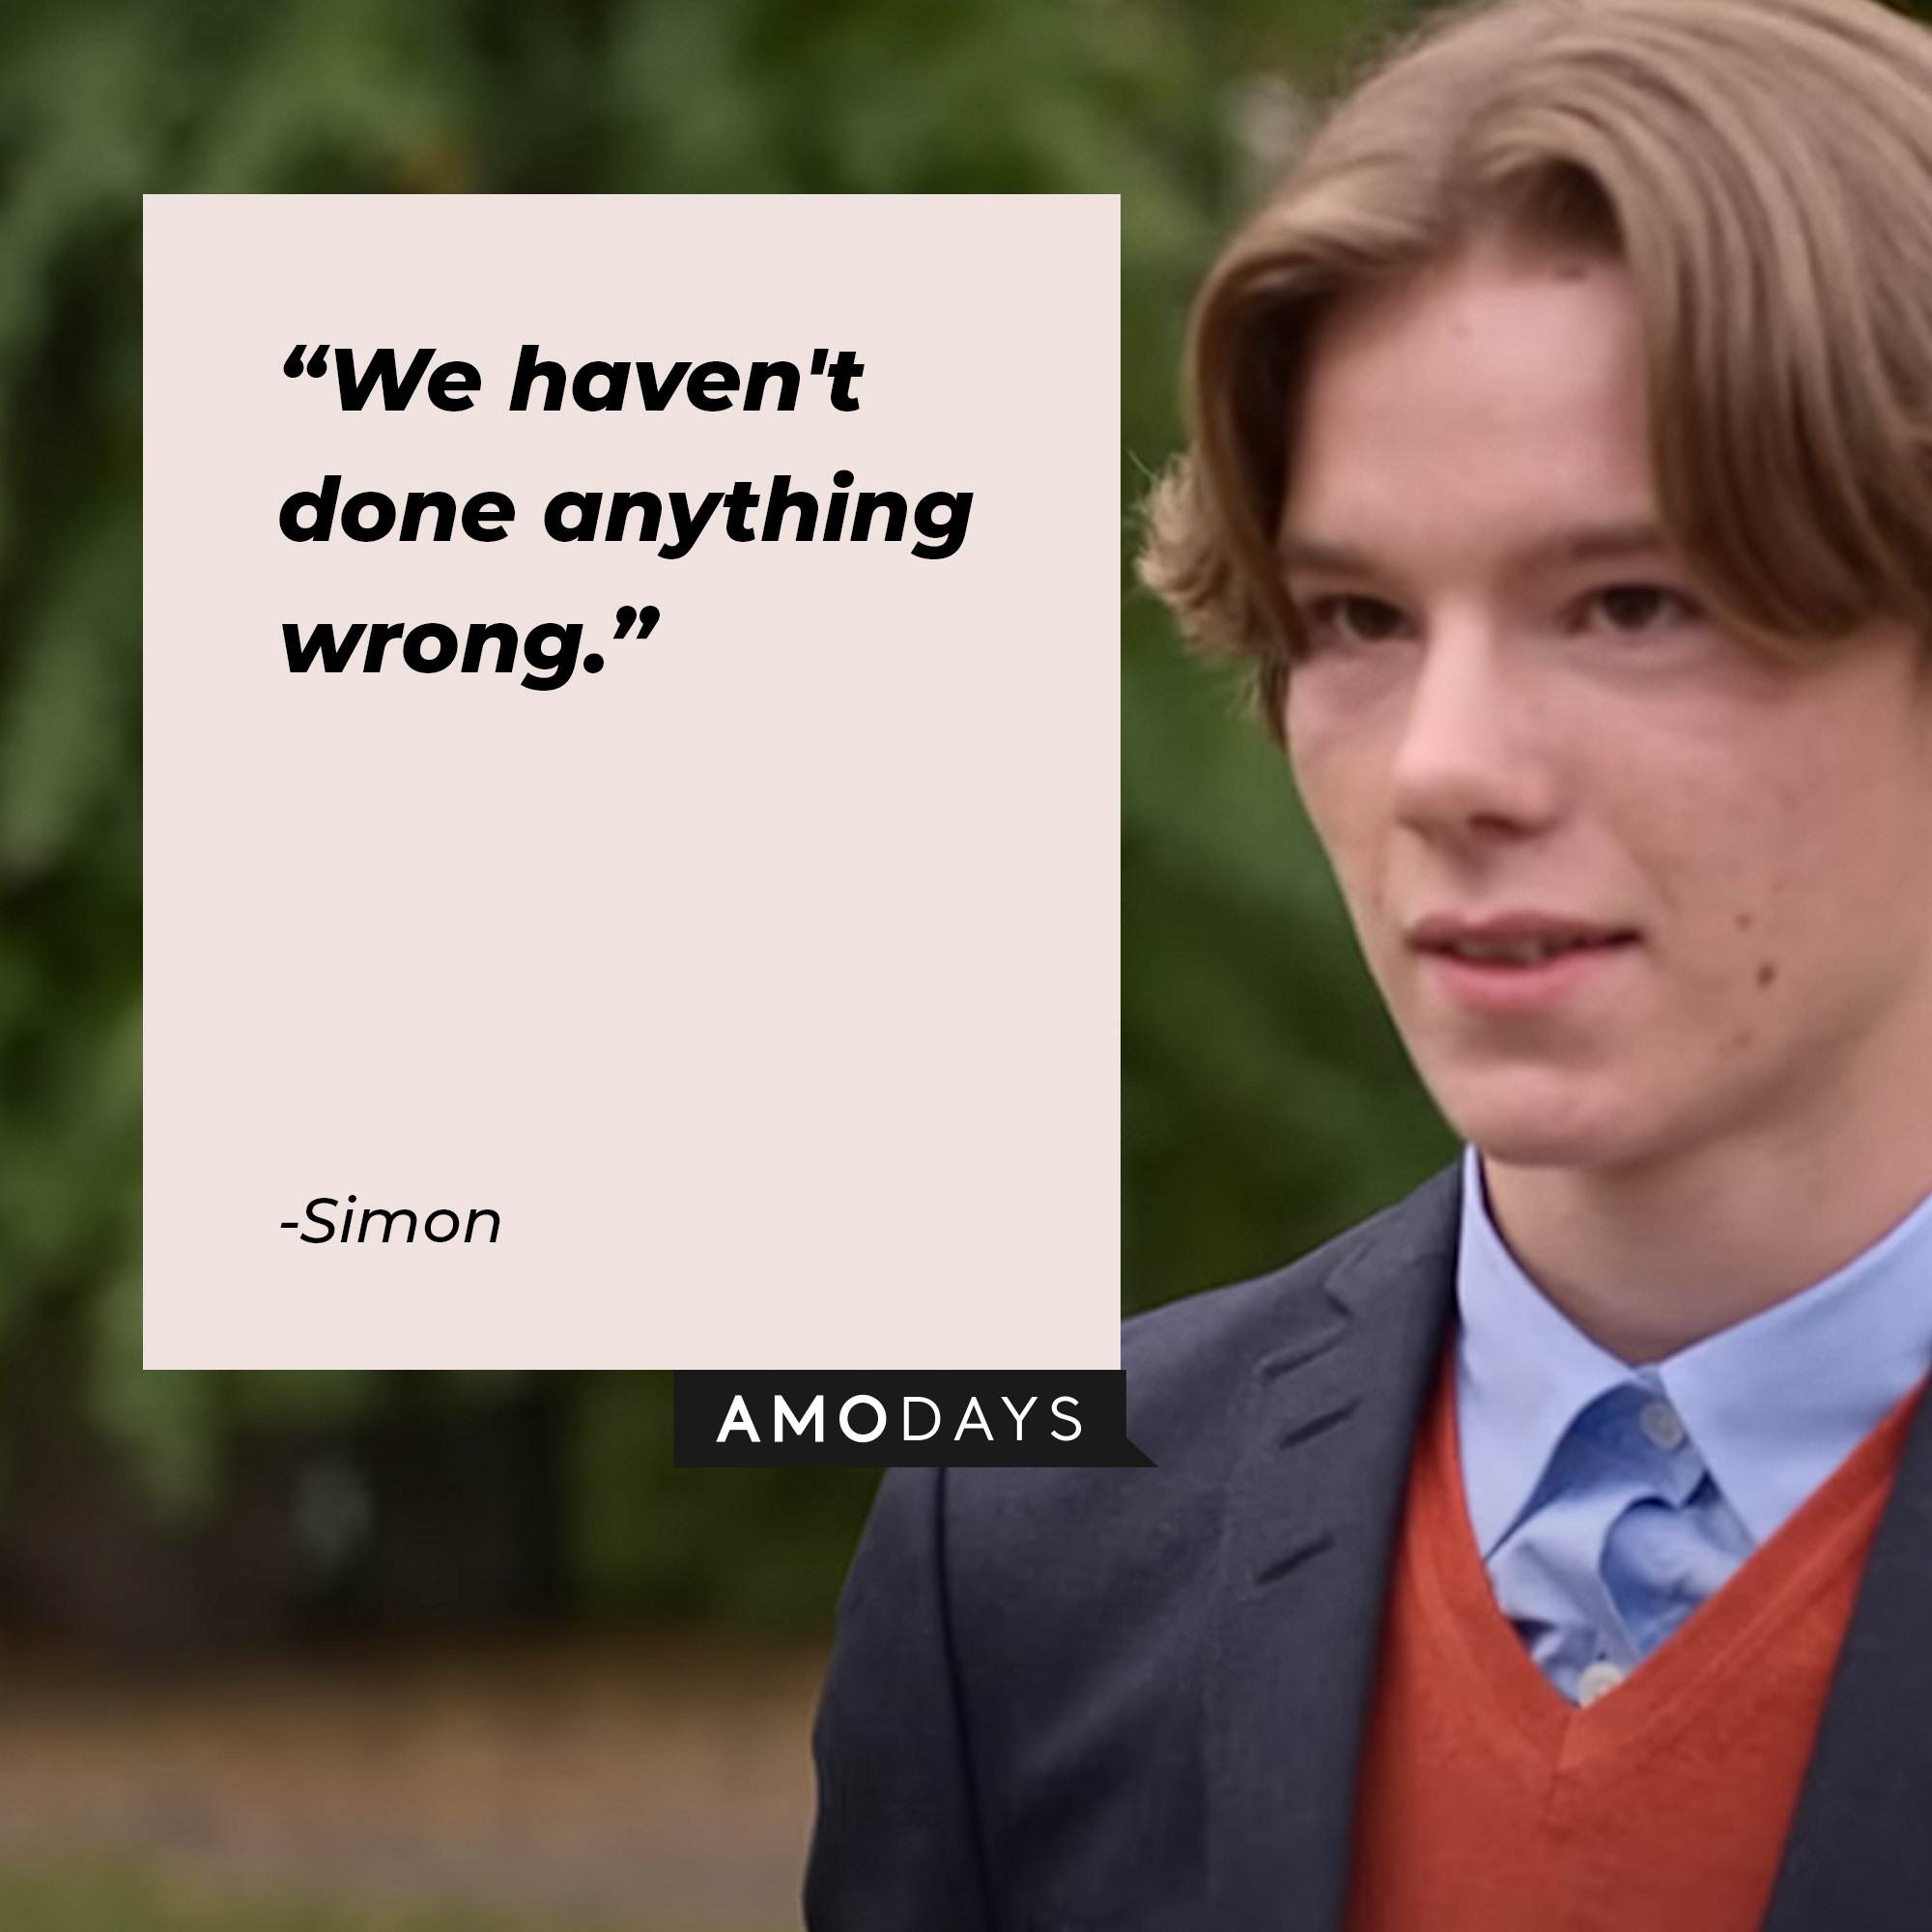 Simon’s quote: "We haven't done anything wrong."  | Image: Youtube.com/Netflix